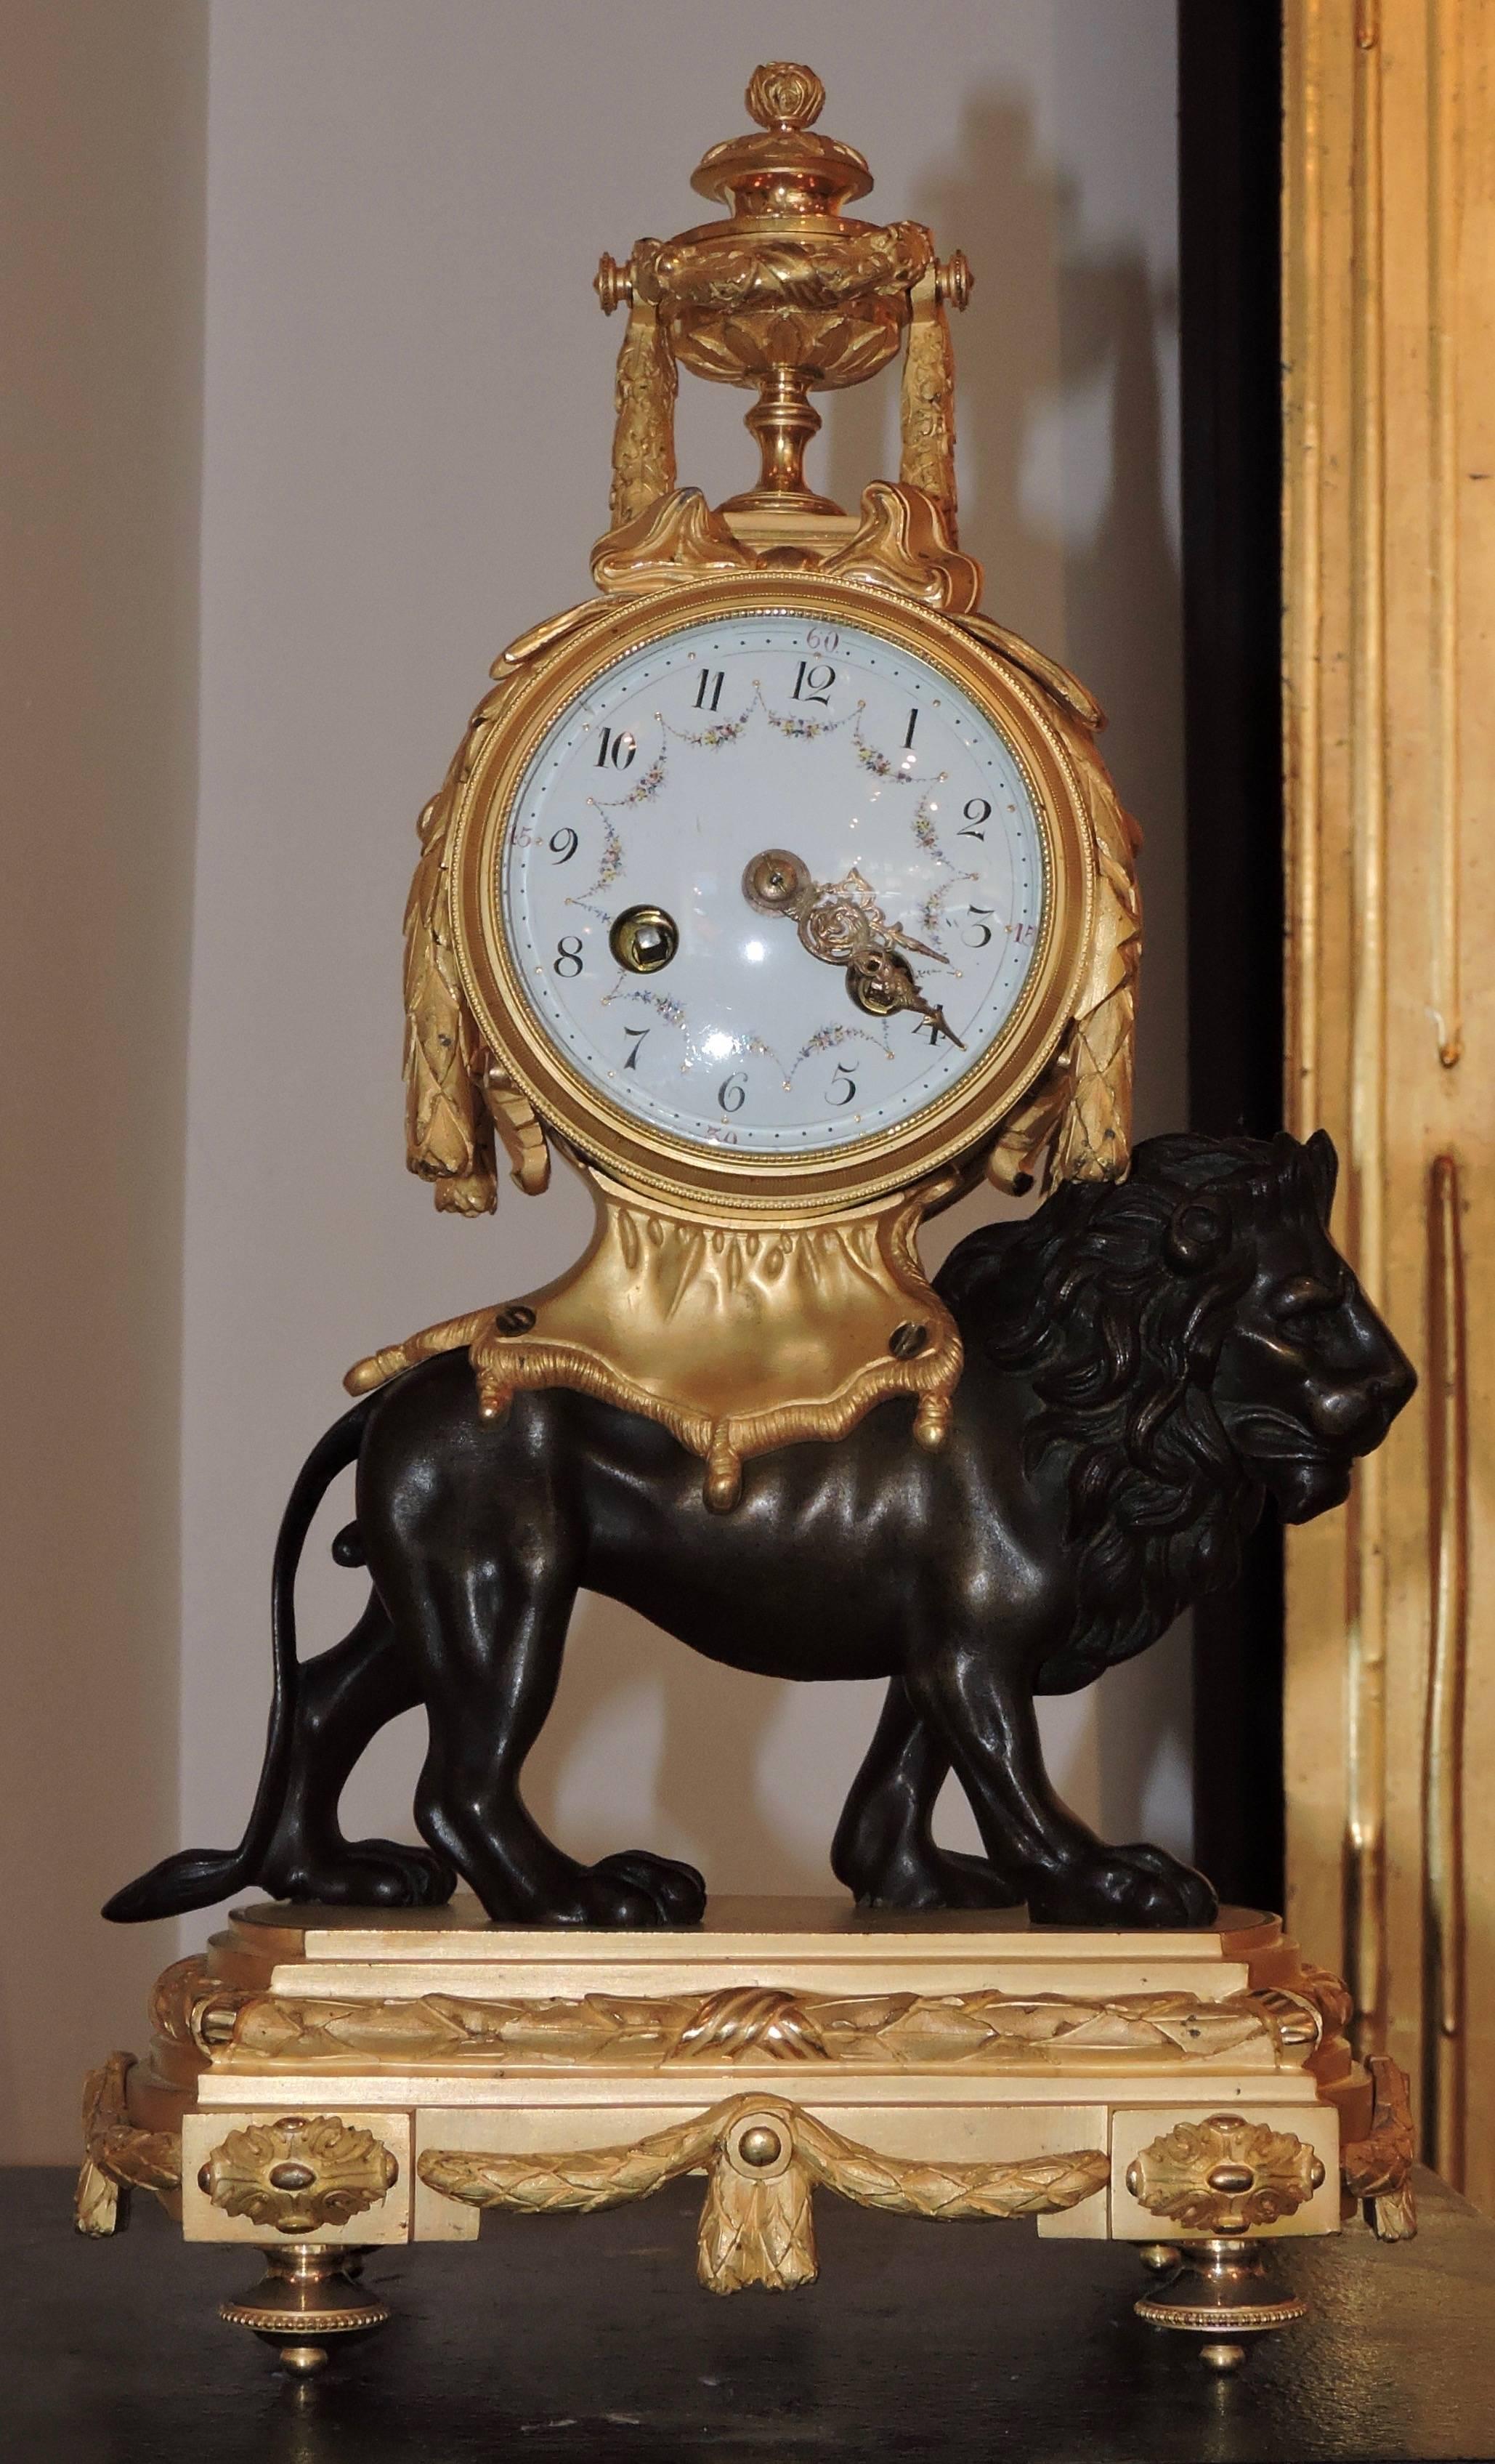 A French Louis XVI style ormolu and patinated bronze pendule au lion
The clock surmounted by a covered urn, mounted on the back of a patinated bronze lion with mane and serpentine tail on a rectangular base on which are suspended garlands of laurel